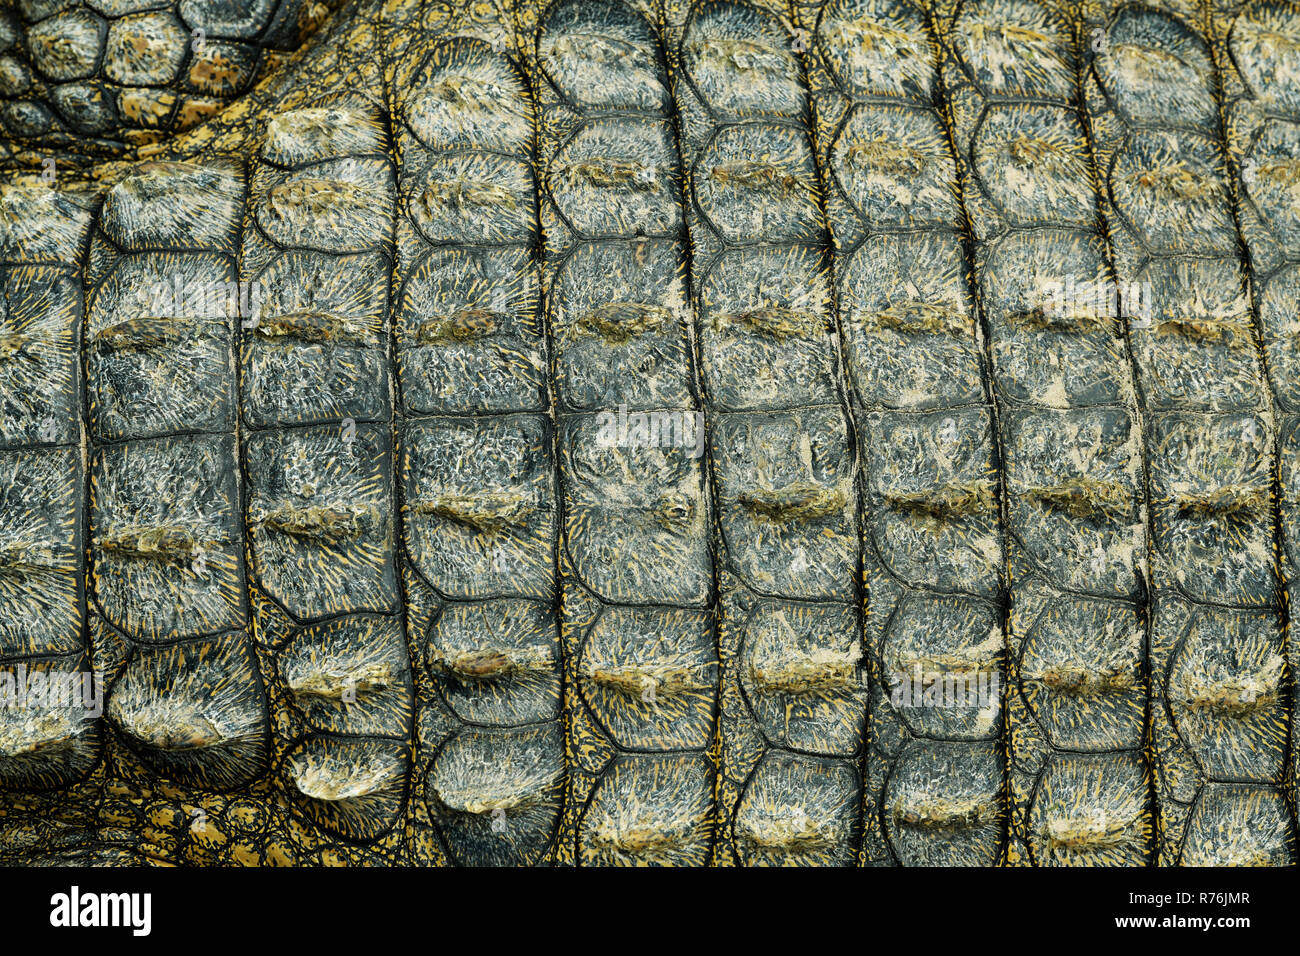 Durban, KwaZulu-Natal, South Africa, lines and shapes in natural pattern, close-up, detail of captive bred Nile Crocodile skin, Crocodylus niloticus Stock Photo